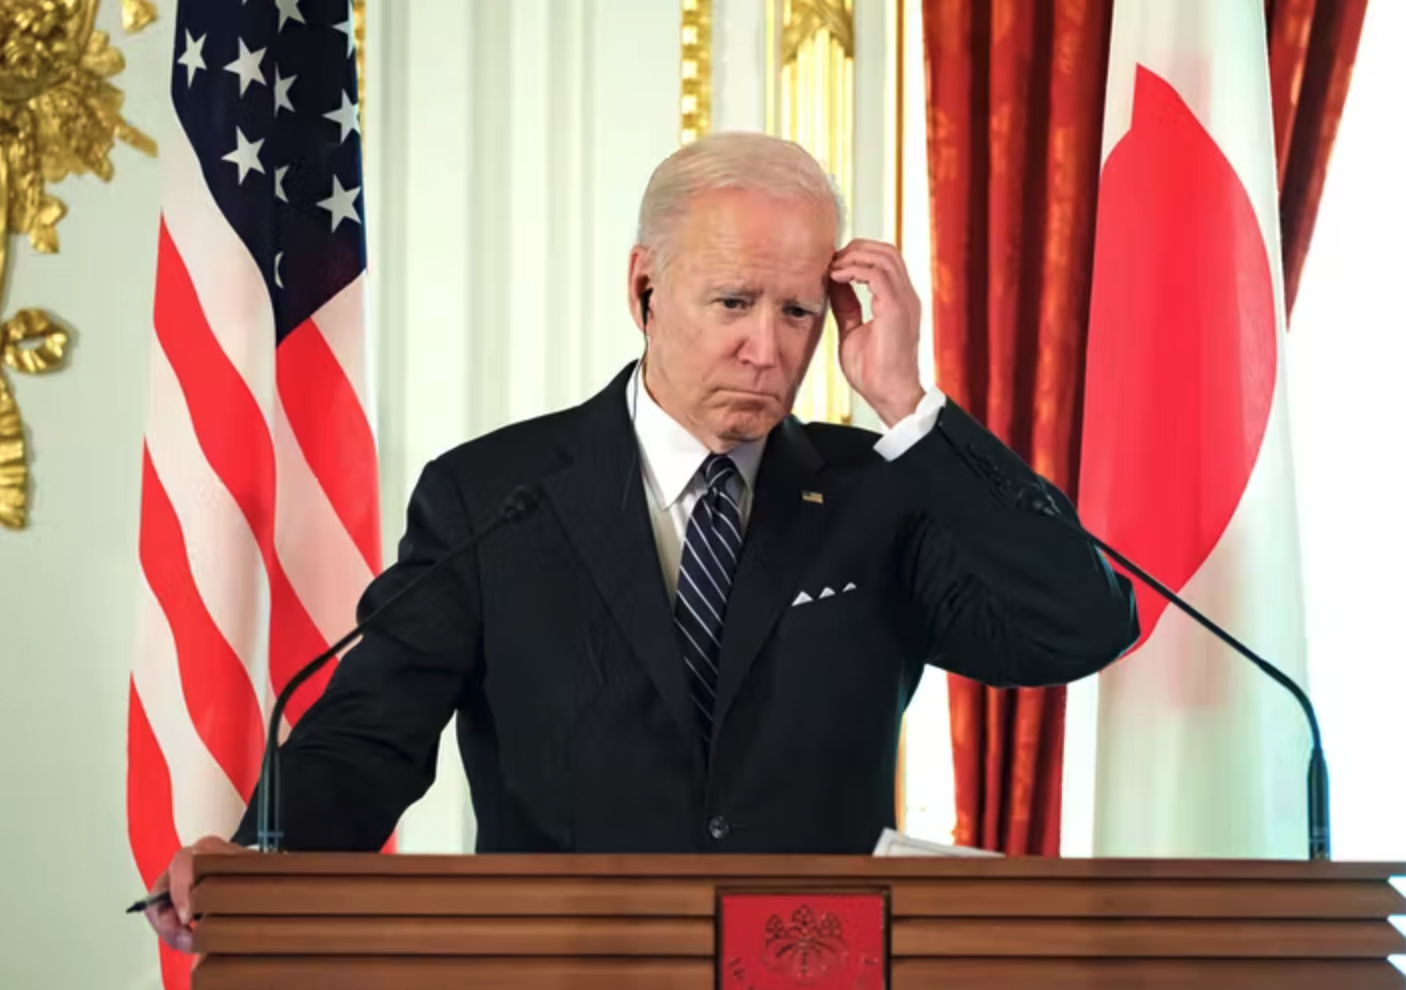 Biden on Taiwan: Did he really commit US forces to stopping any invasion by China? An expert explains why, on balance, probably not